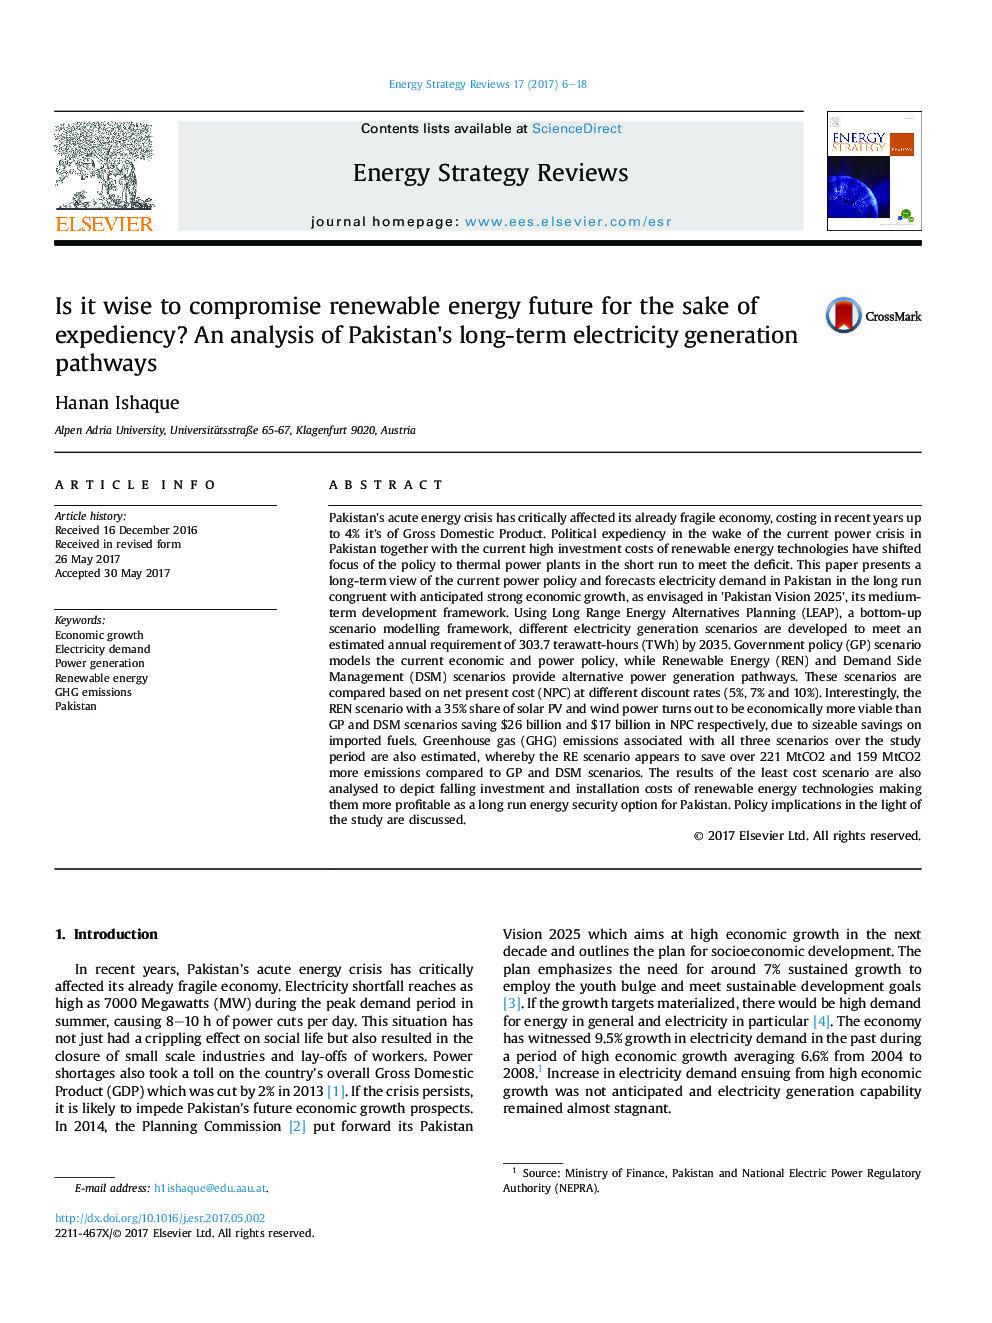 Is it wise to compromise renewable energy future for the sake of expediency? An analysis of Pakistan's long-term electricity generation pathways